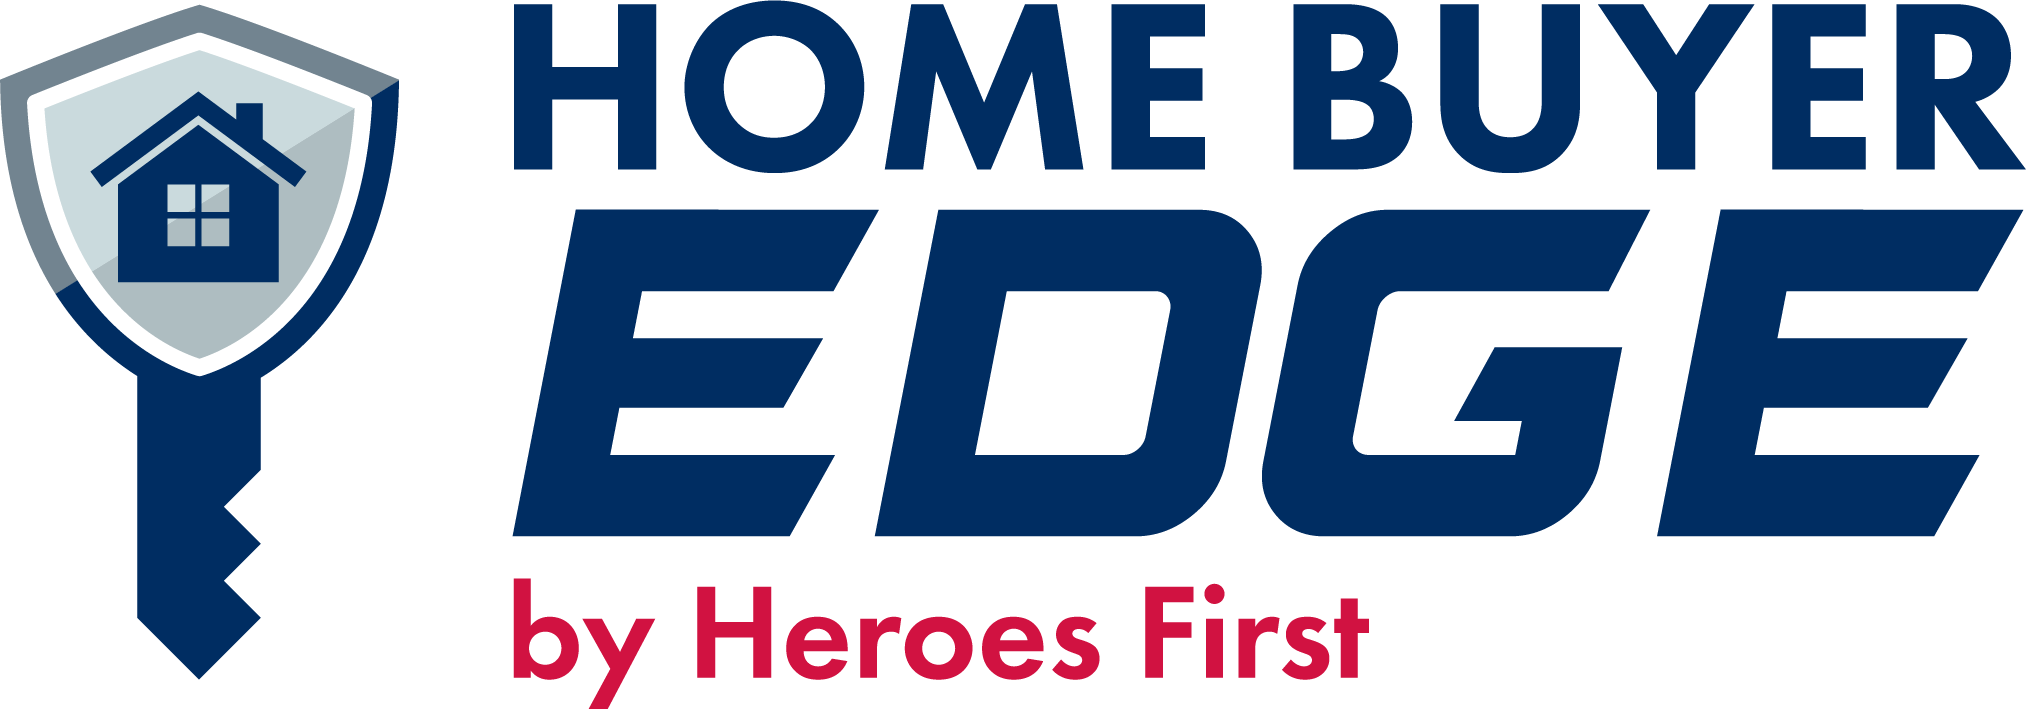 home-buyer-edge-heroes-first